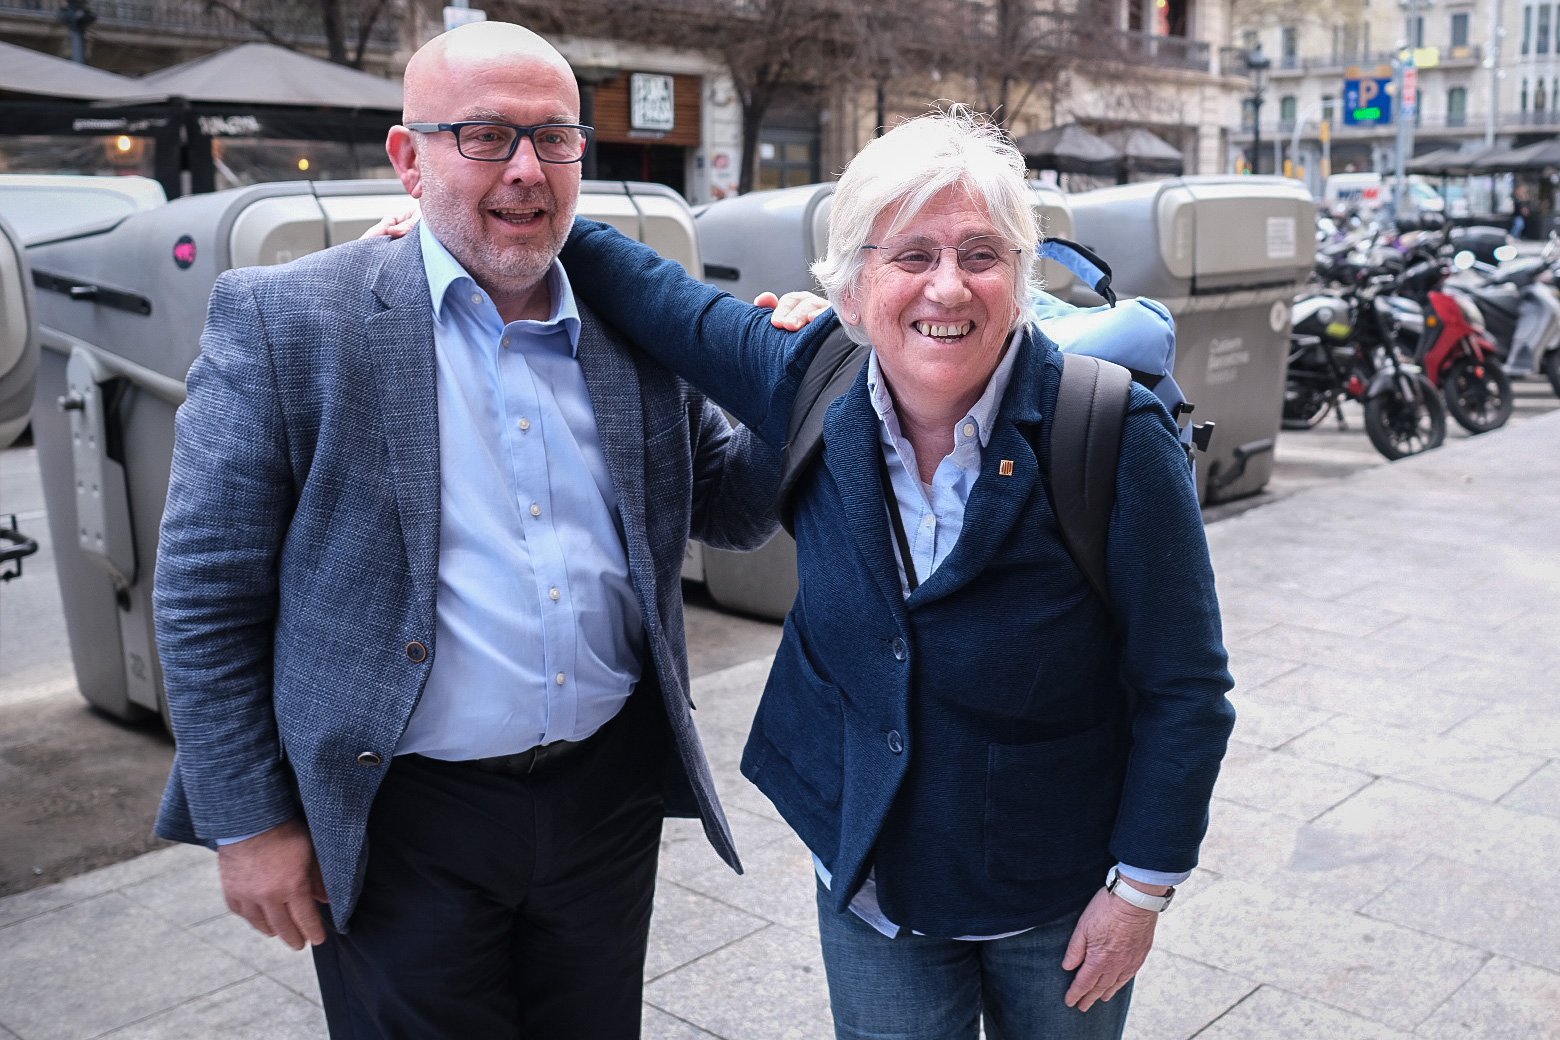 Clara Ponsatí returns home from exile and appears in Barcelona